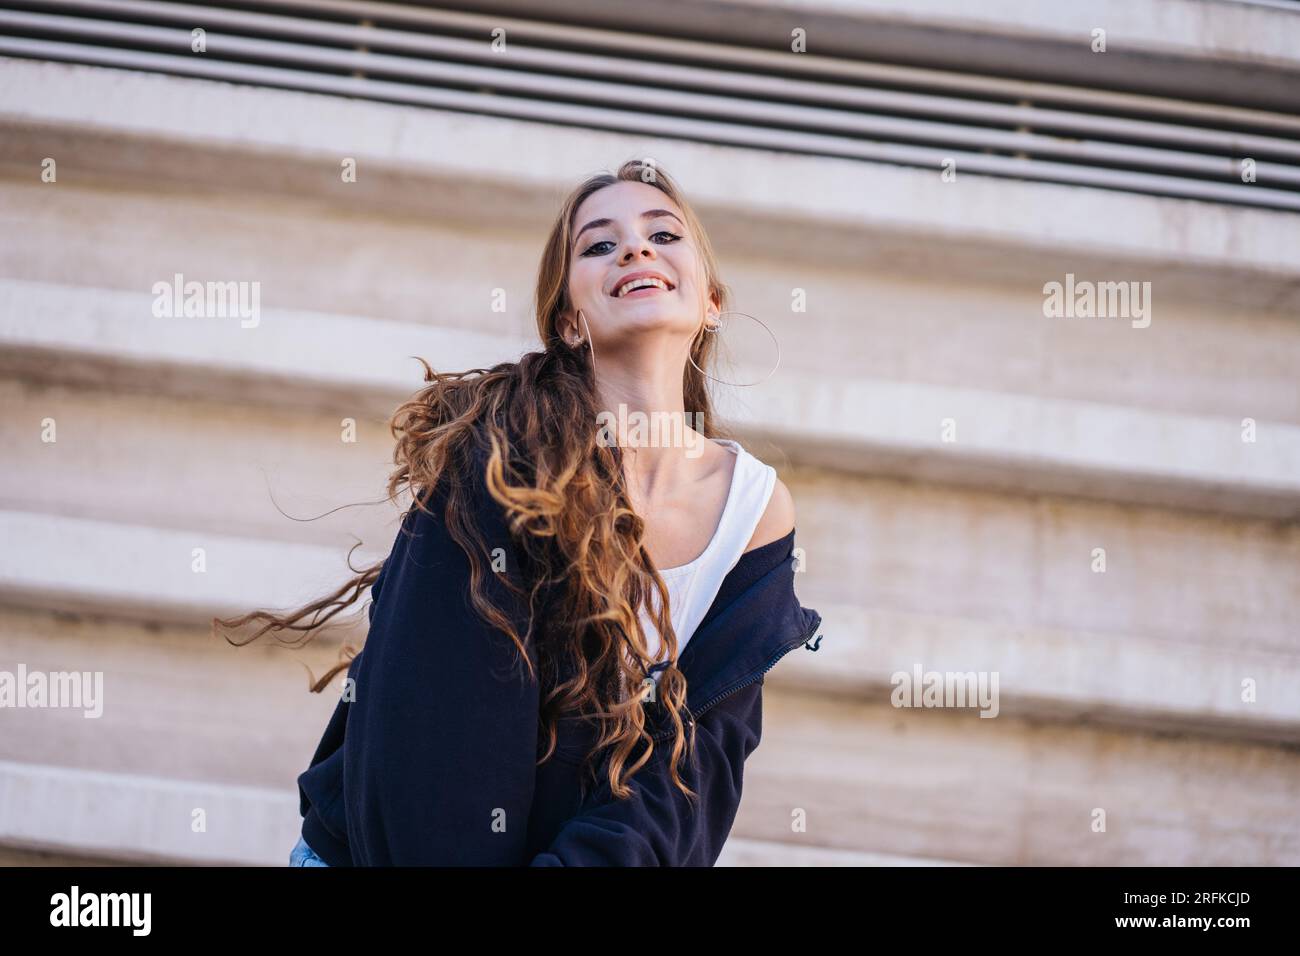 Cute Girl Smiling And Looking At Camera Next To A Concrete Wall. Stock Photo